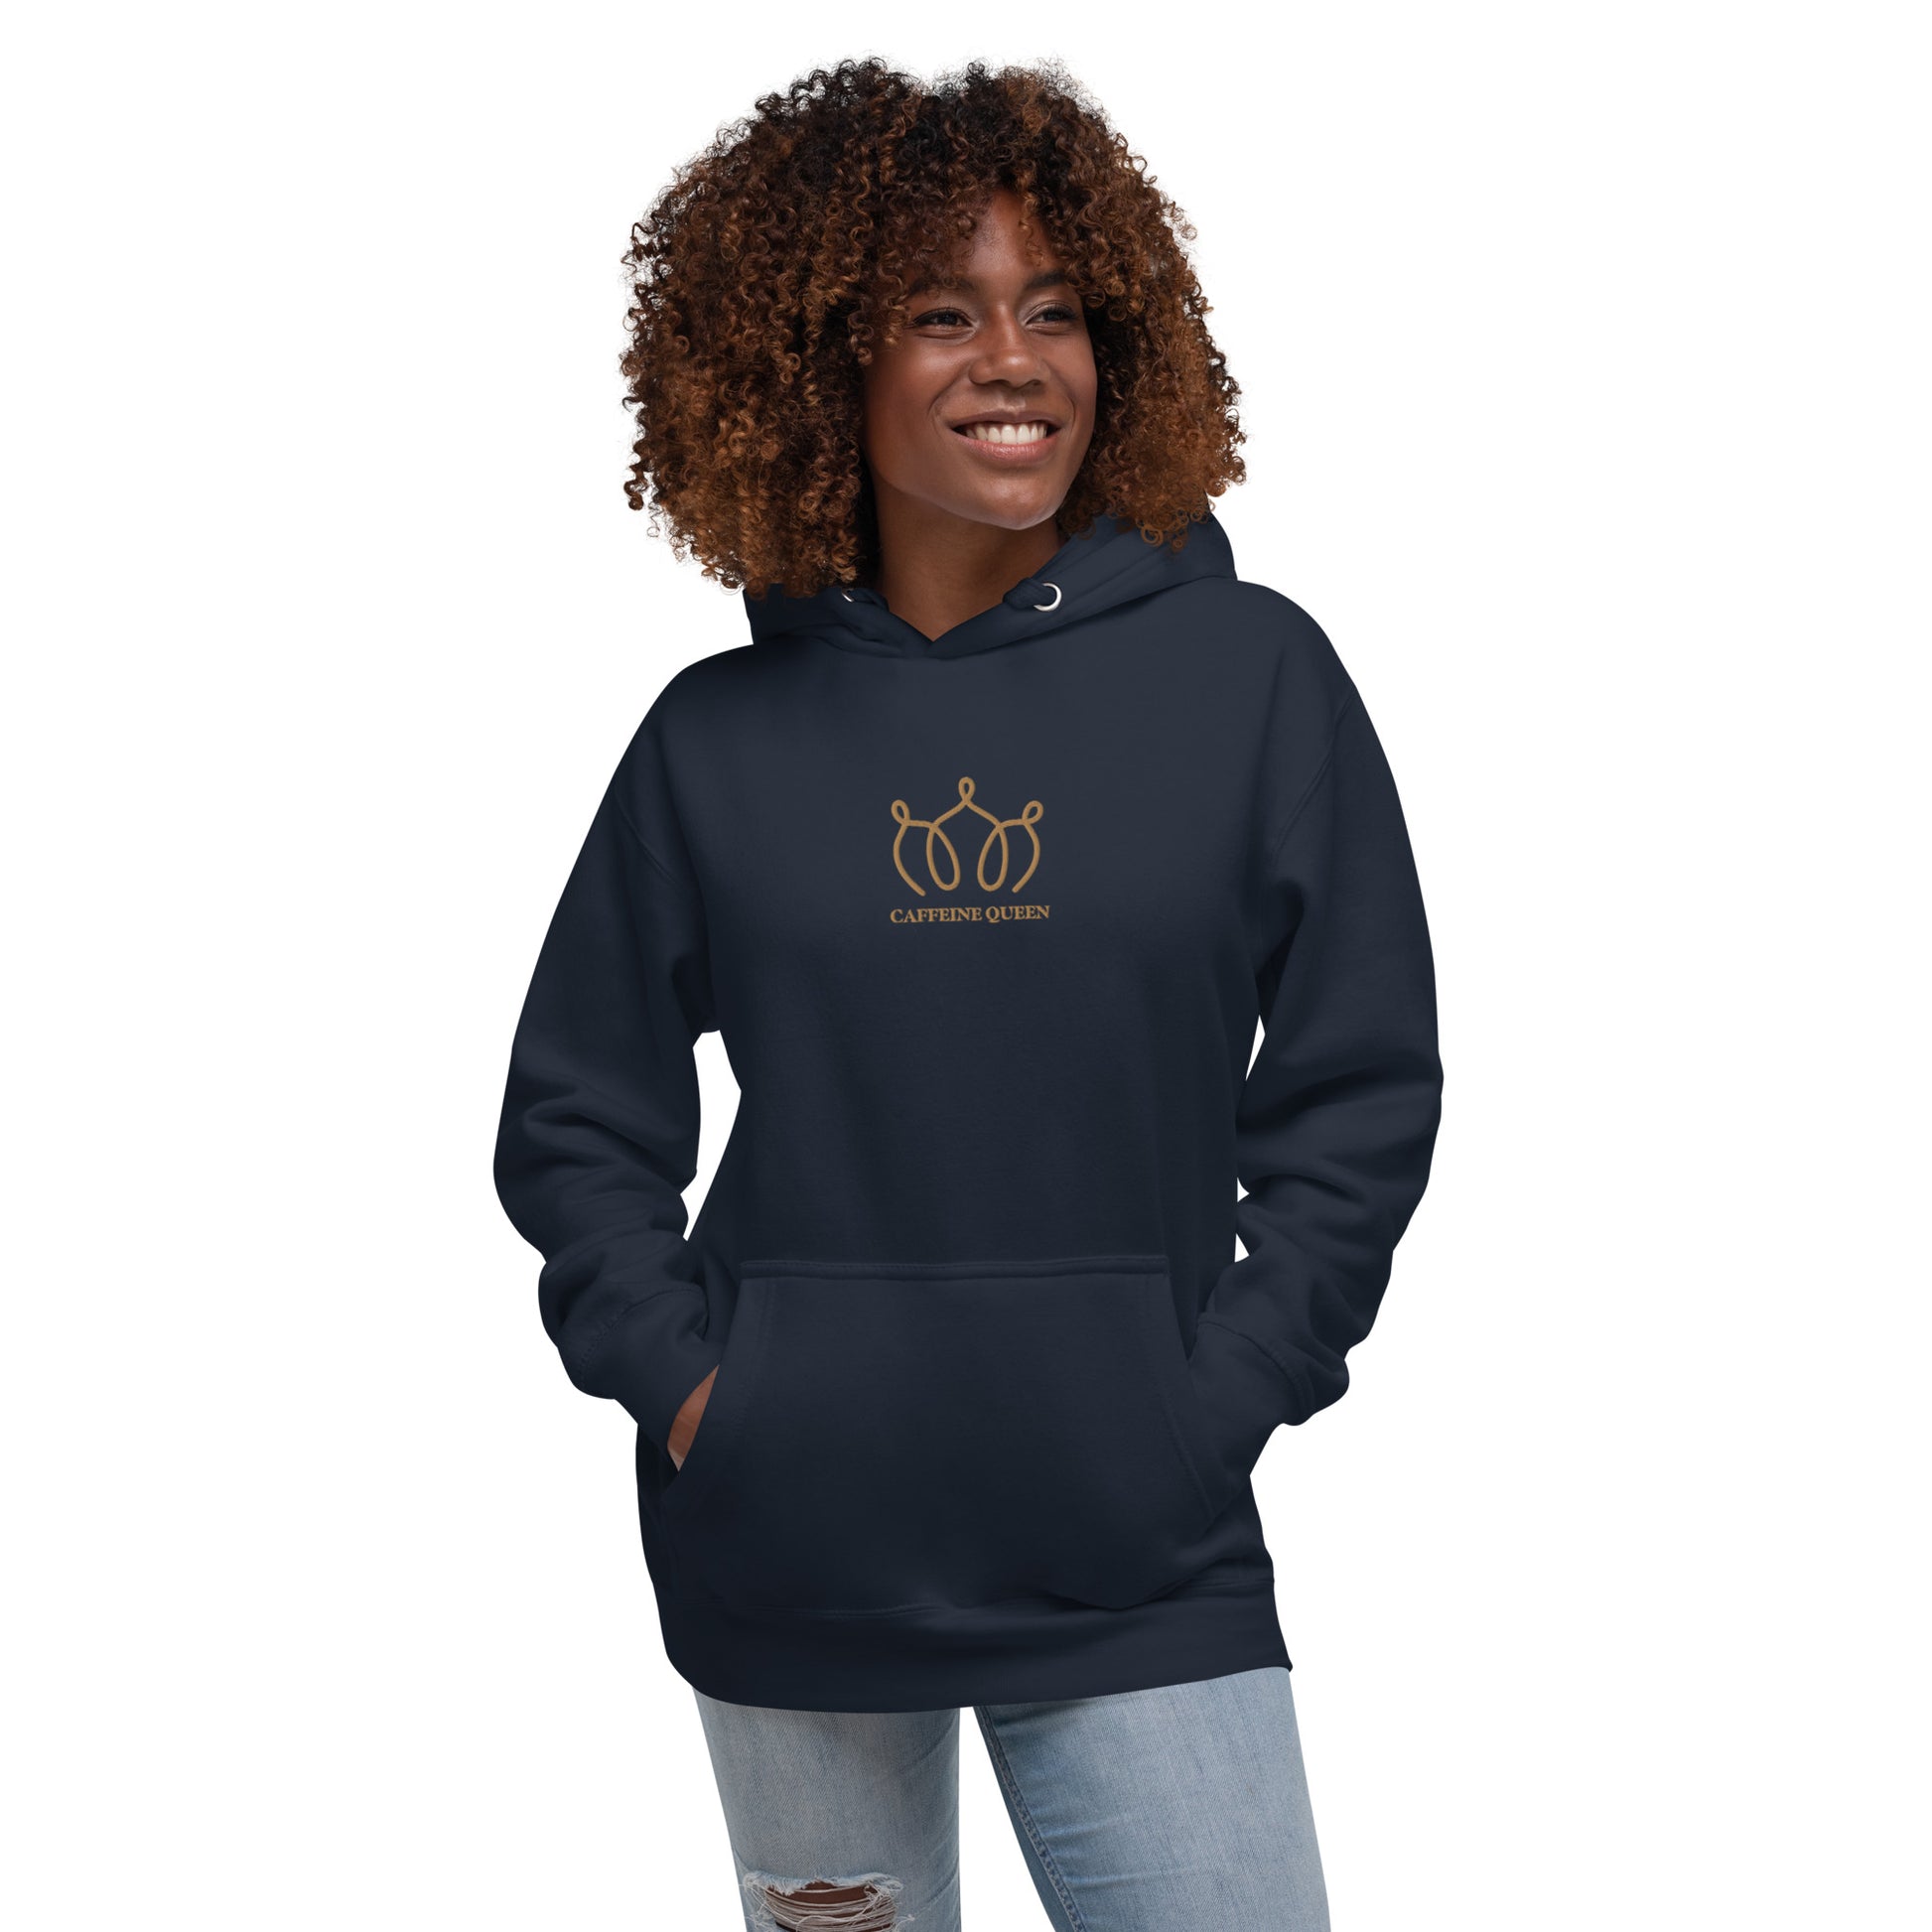 Woman wearing a navy blazer hoodie with an embroidered crown and Caffeine Queen text on the front.